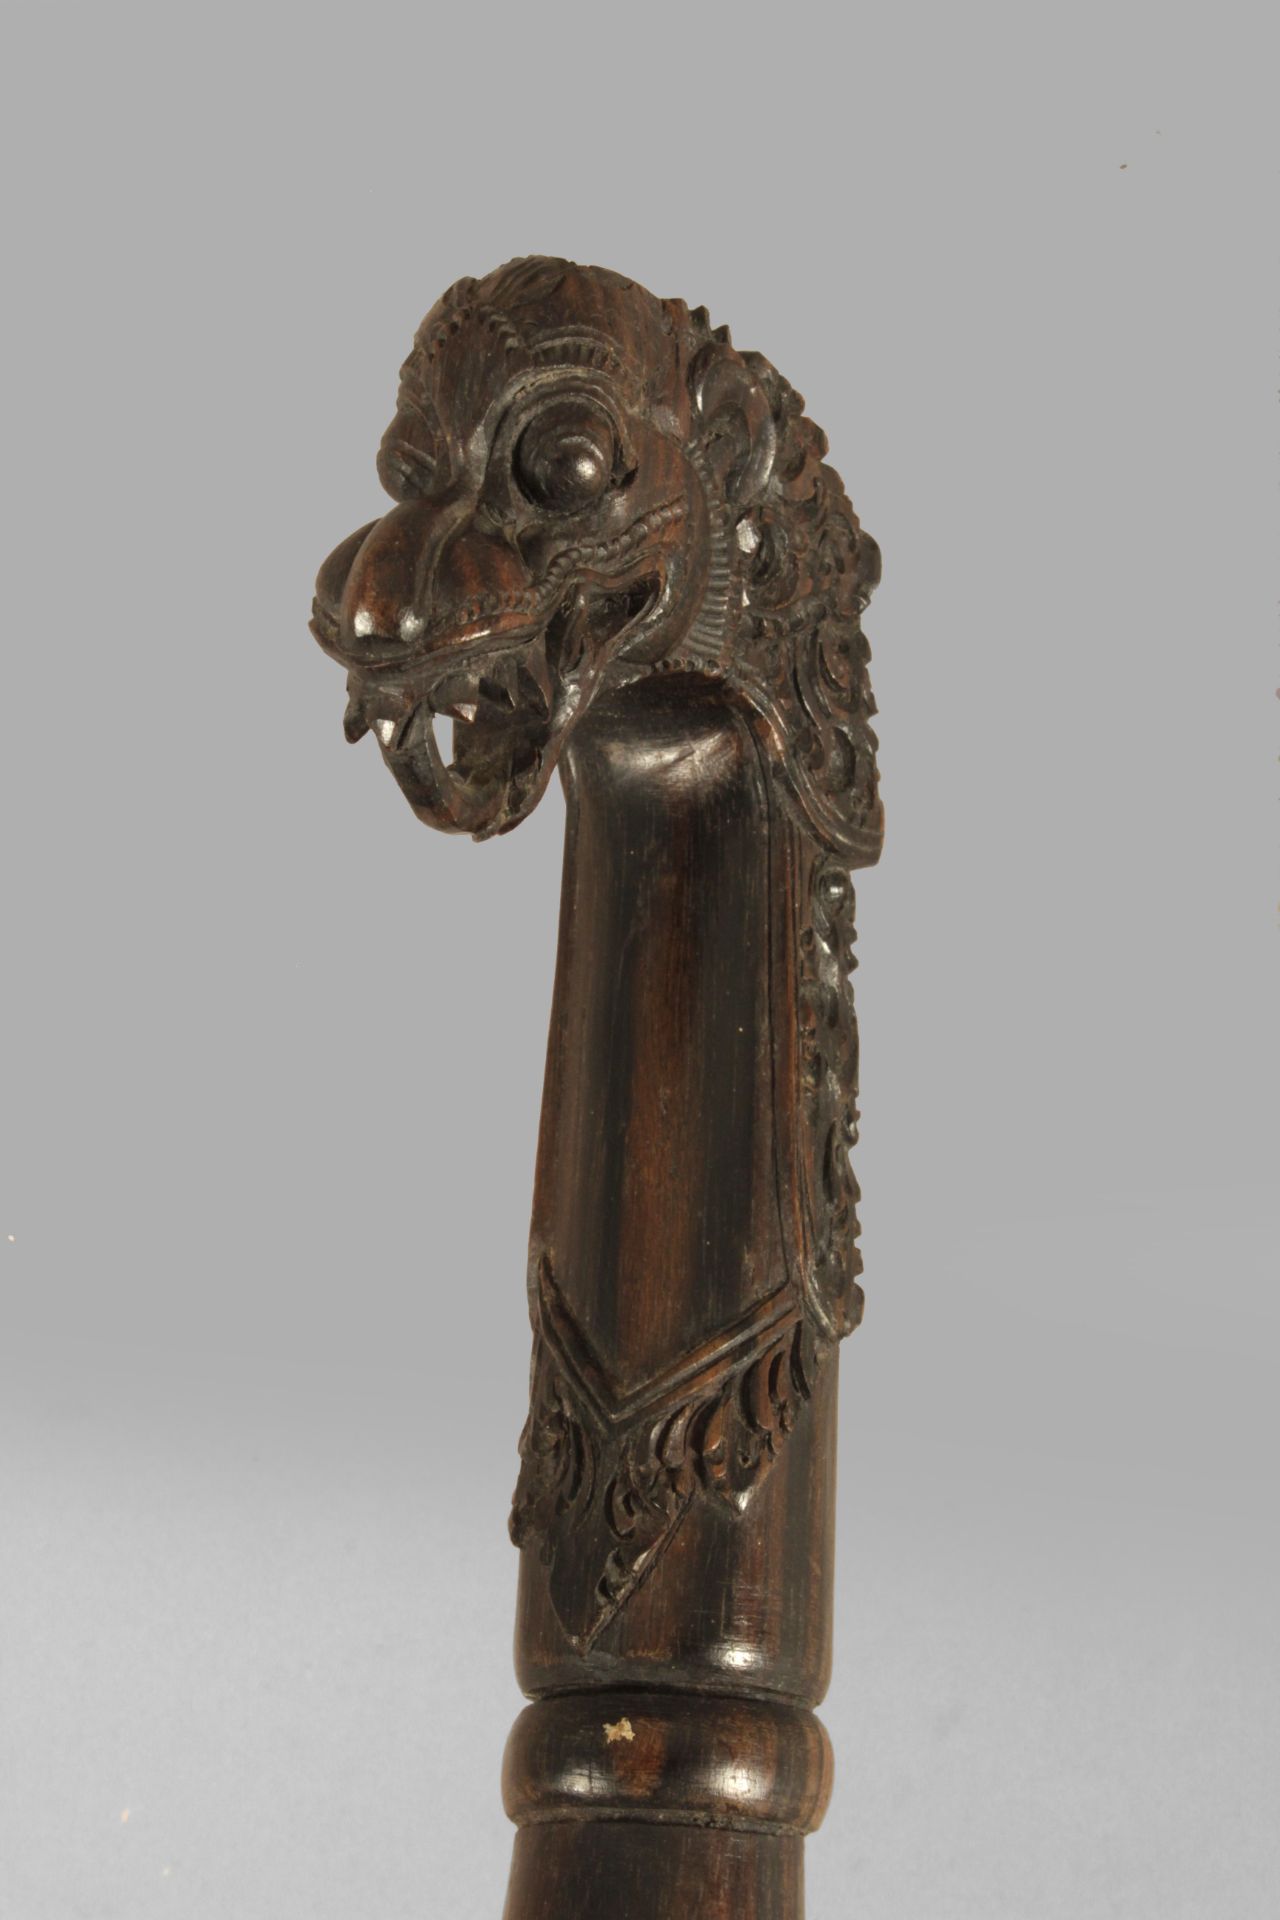 A 20th century Chinese walking stick from the Republic period.